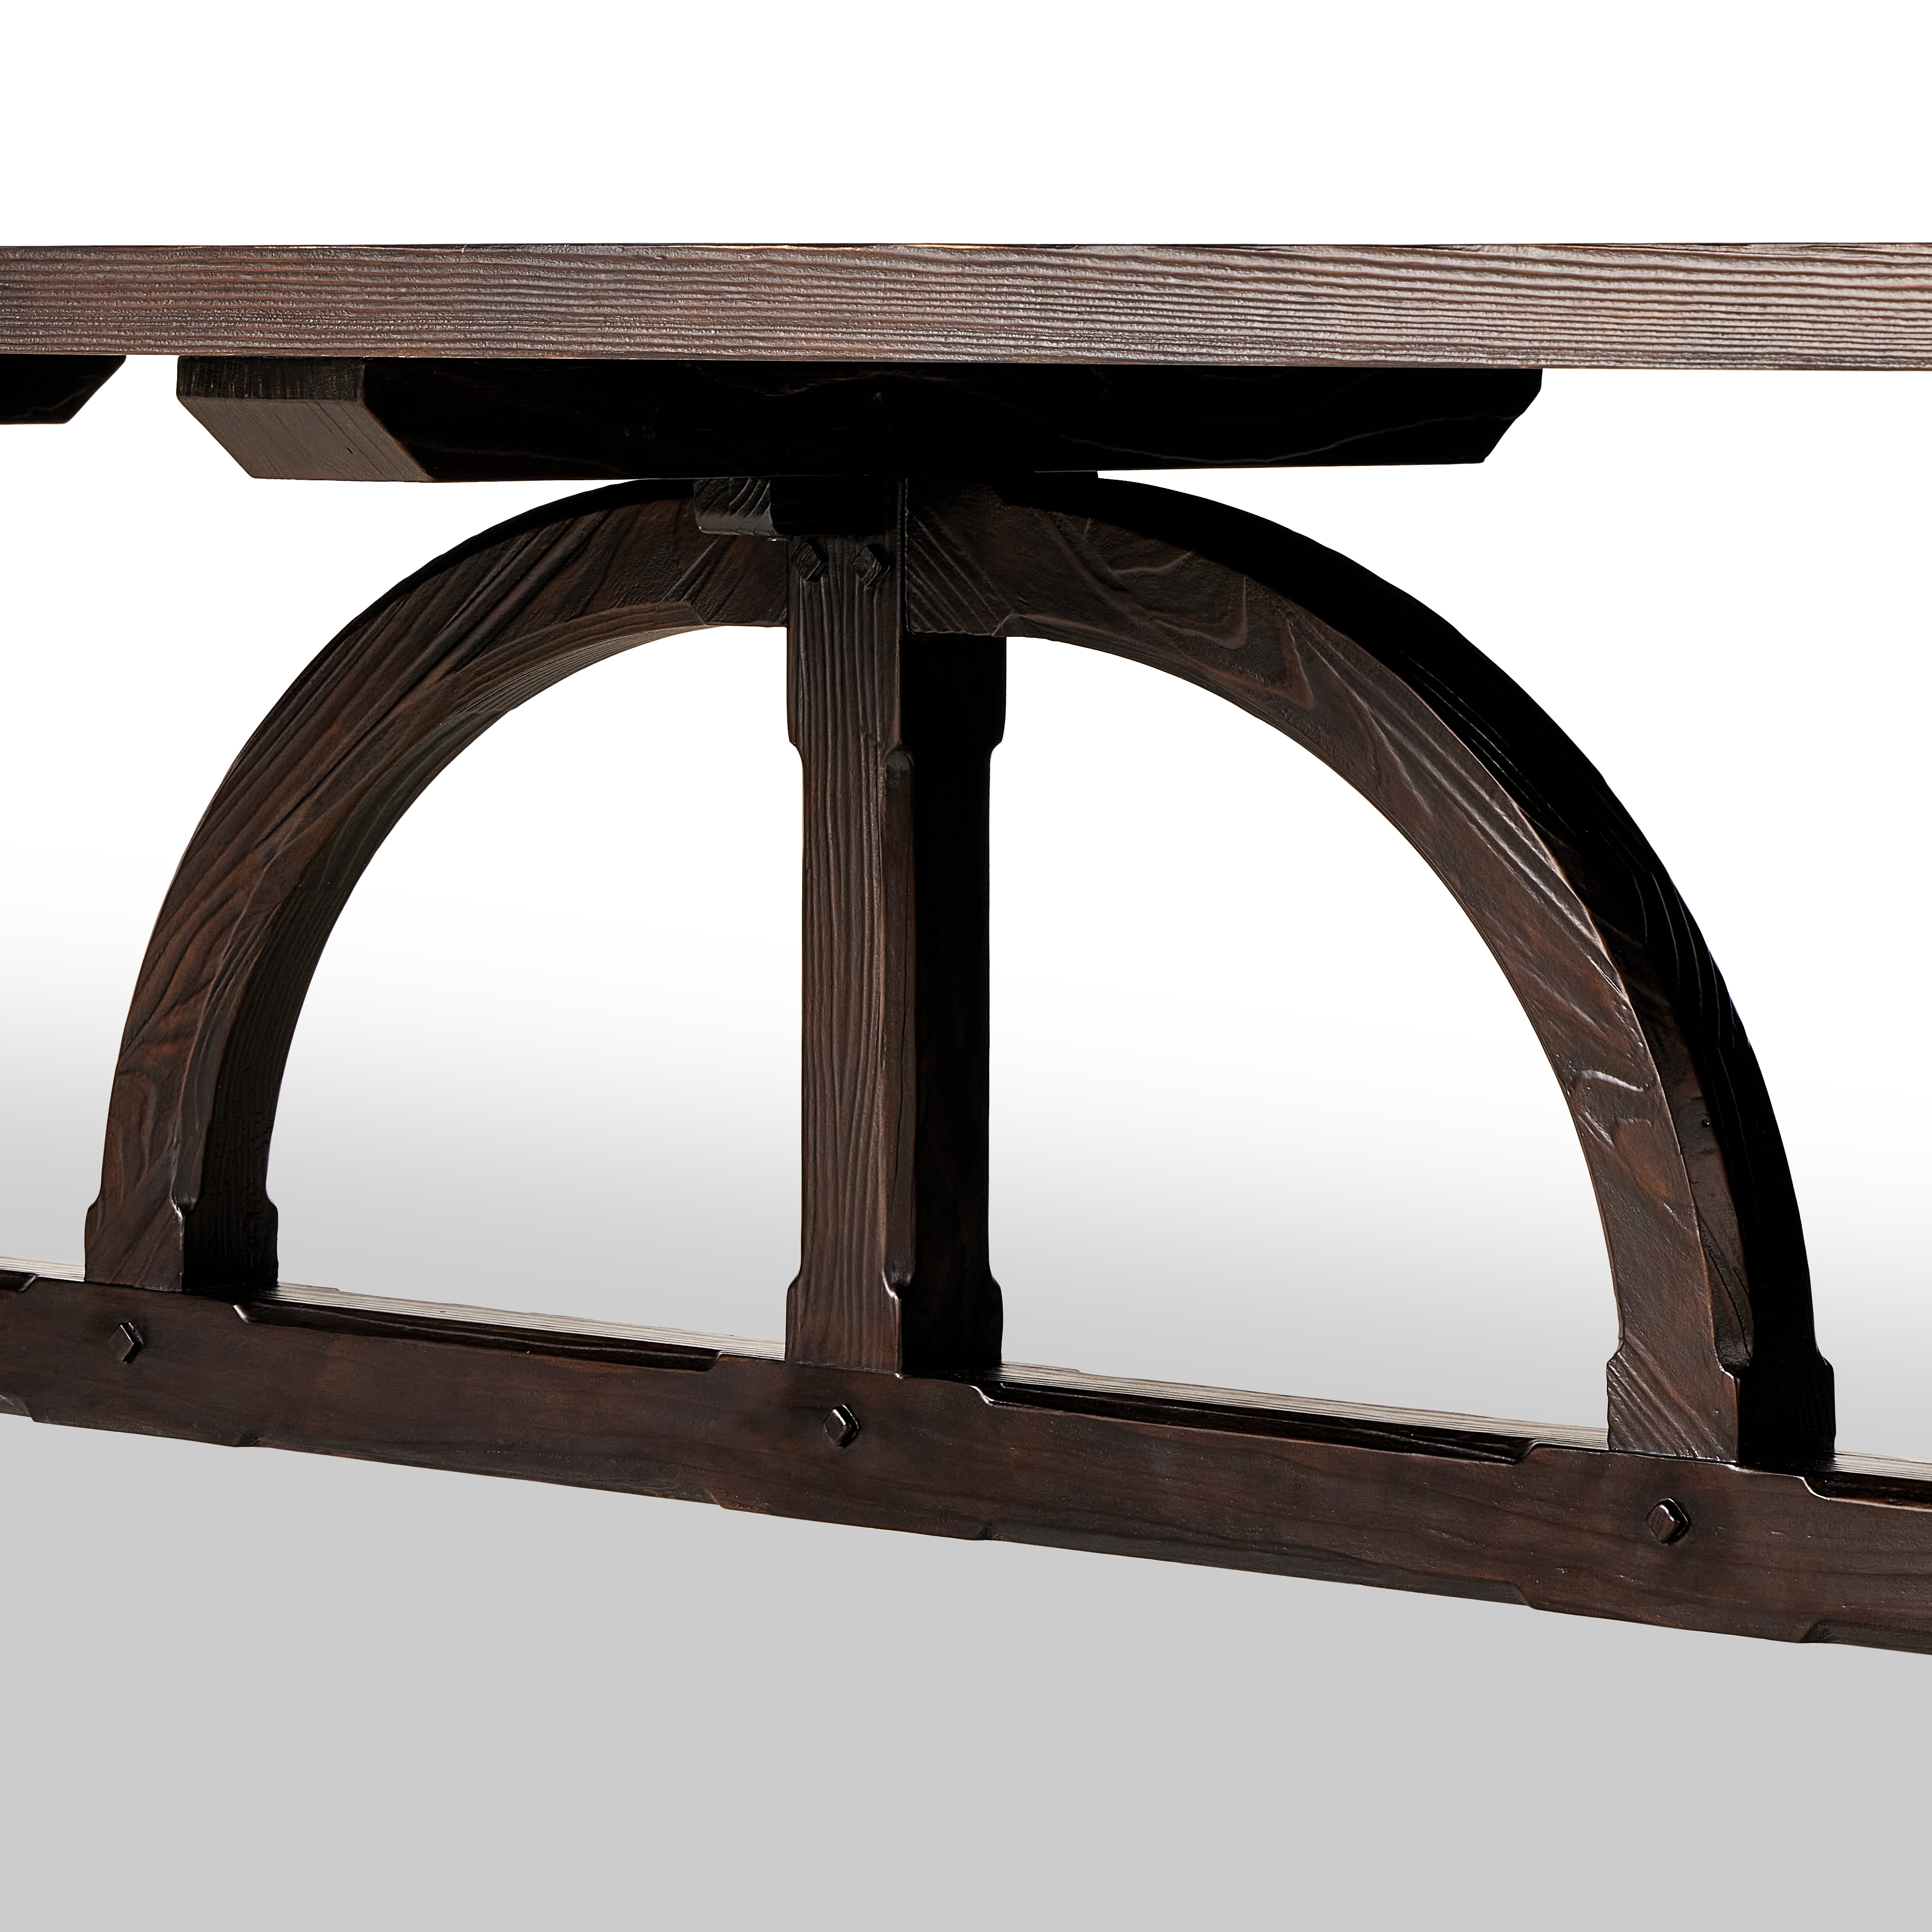 The Arch Dining Table-Medium Brown Fir - Image 11